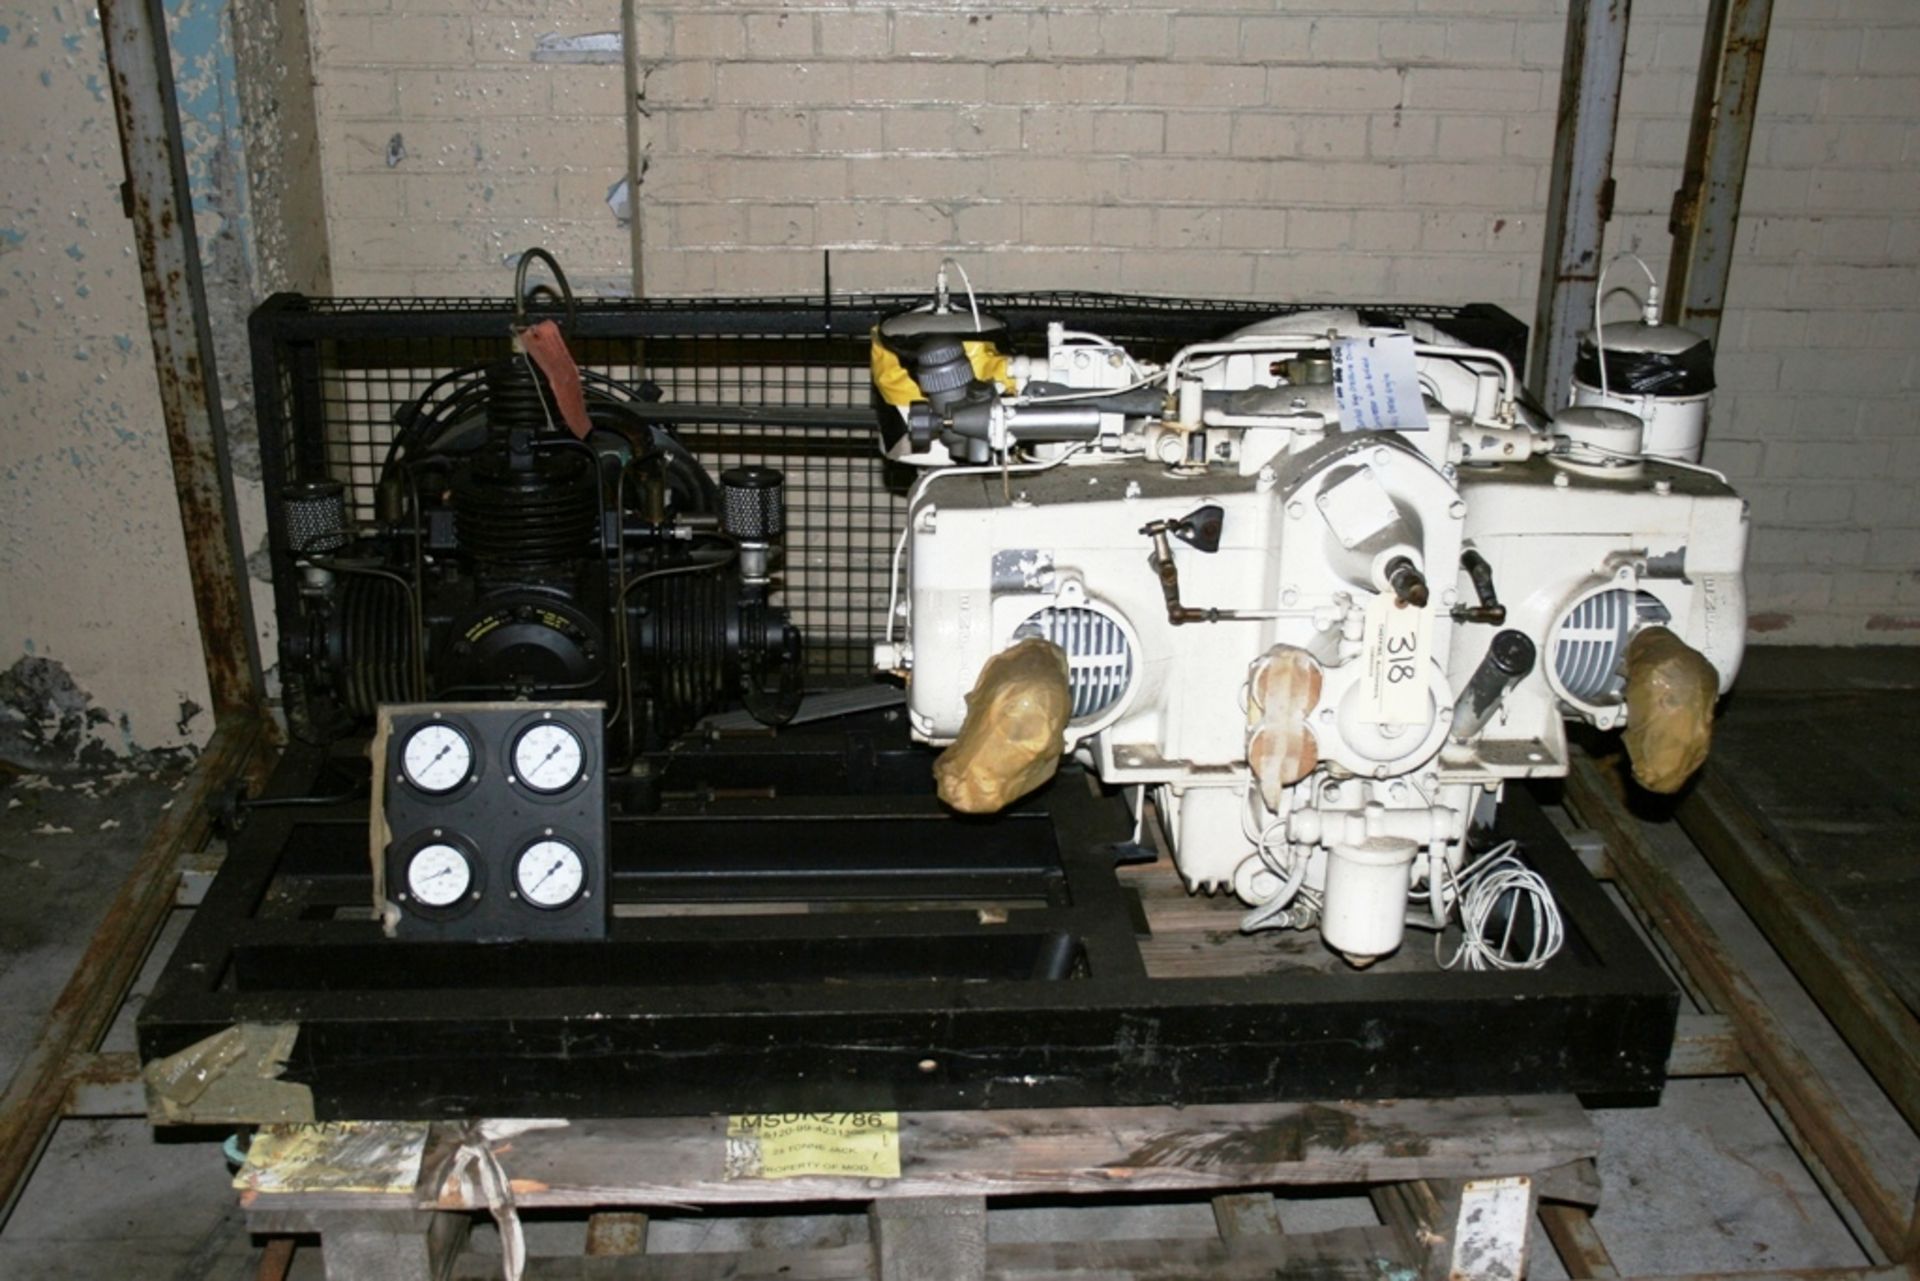 * Diesel Engine Enfield ho2 V twin compressor for diving use, Max working pressure1200PSI unused - Image 2 of 7